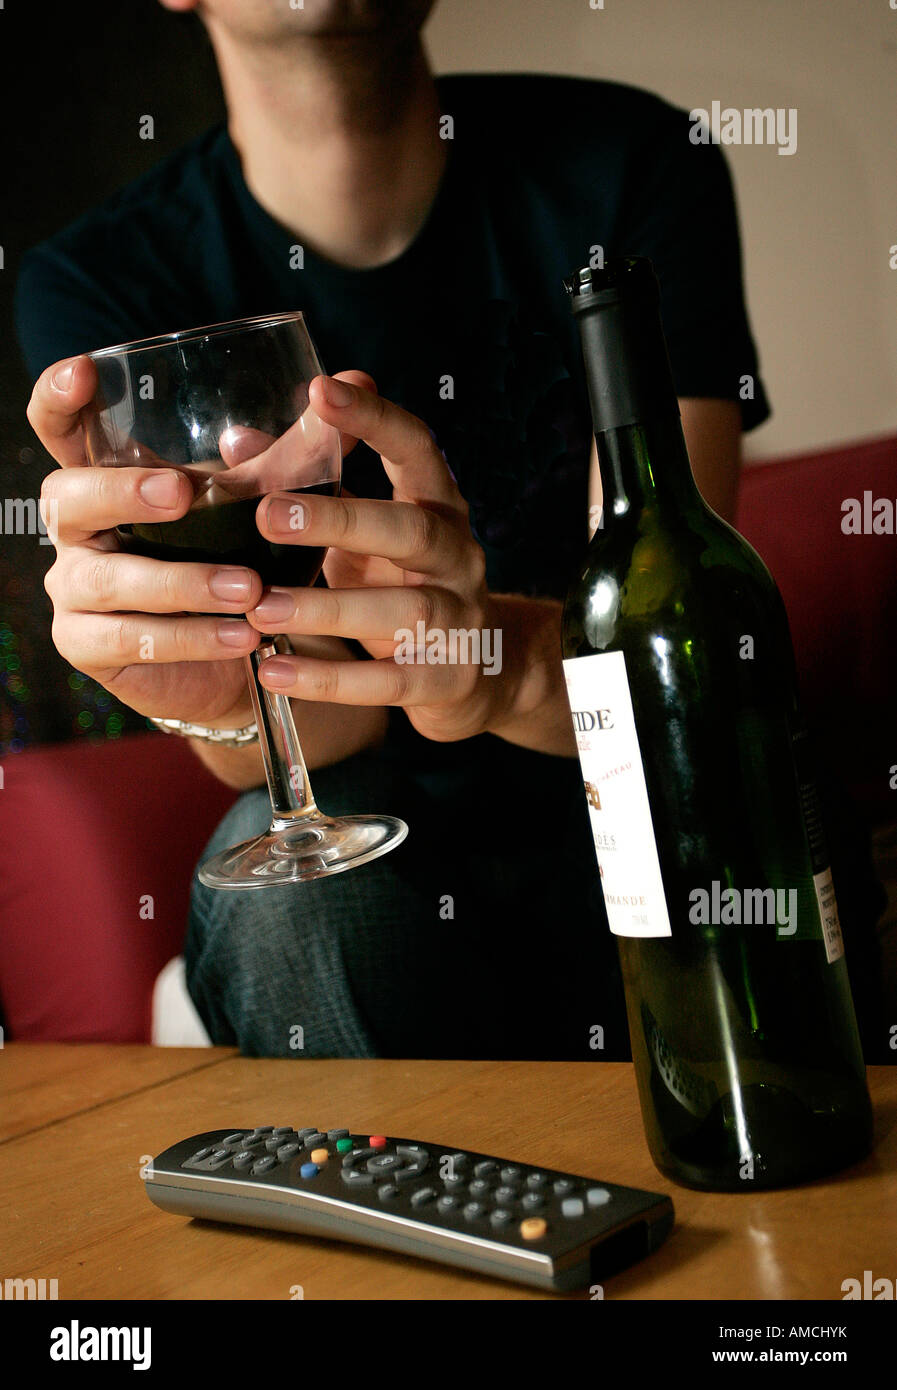 A young man enjoys a glass of wine at home. A television remote control sits on the table in front of him. Stock Photo